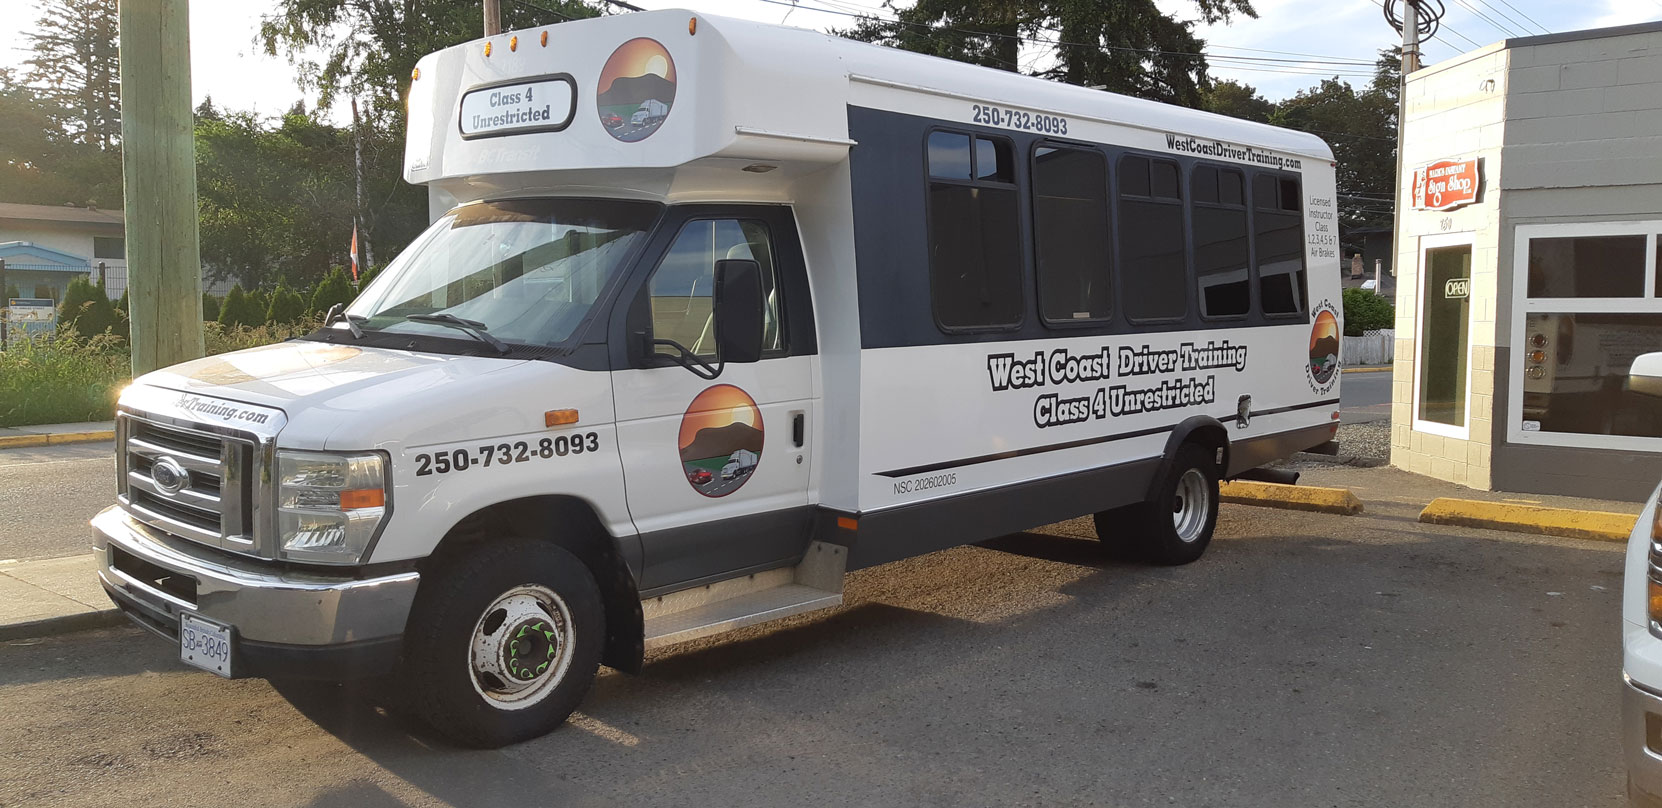 Our Ford E450 20 seat bus at Mark's Instant Sign Shop after application of its final signage [Photo: West Coast Driver Training]